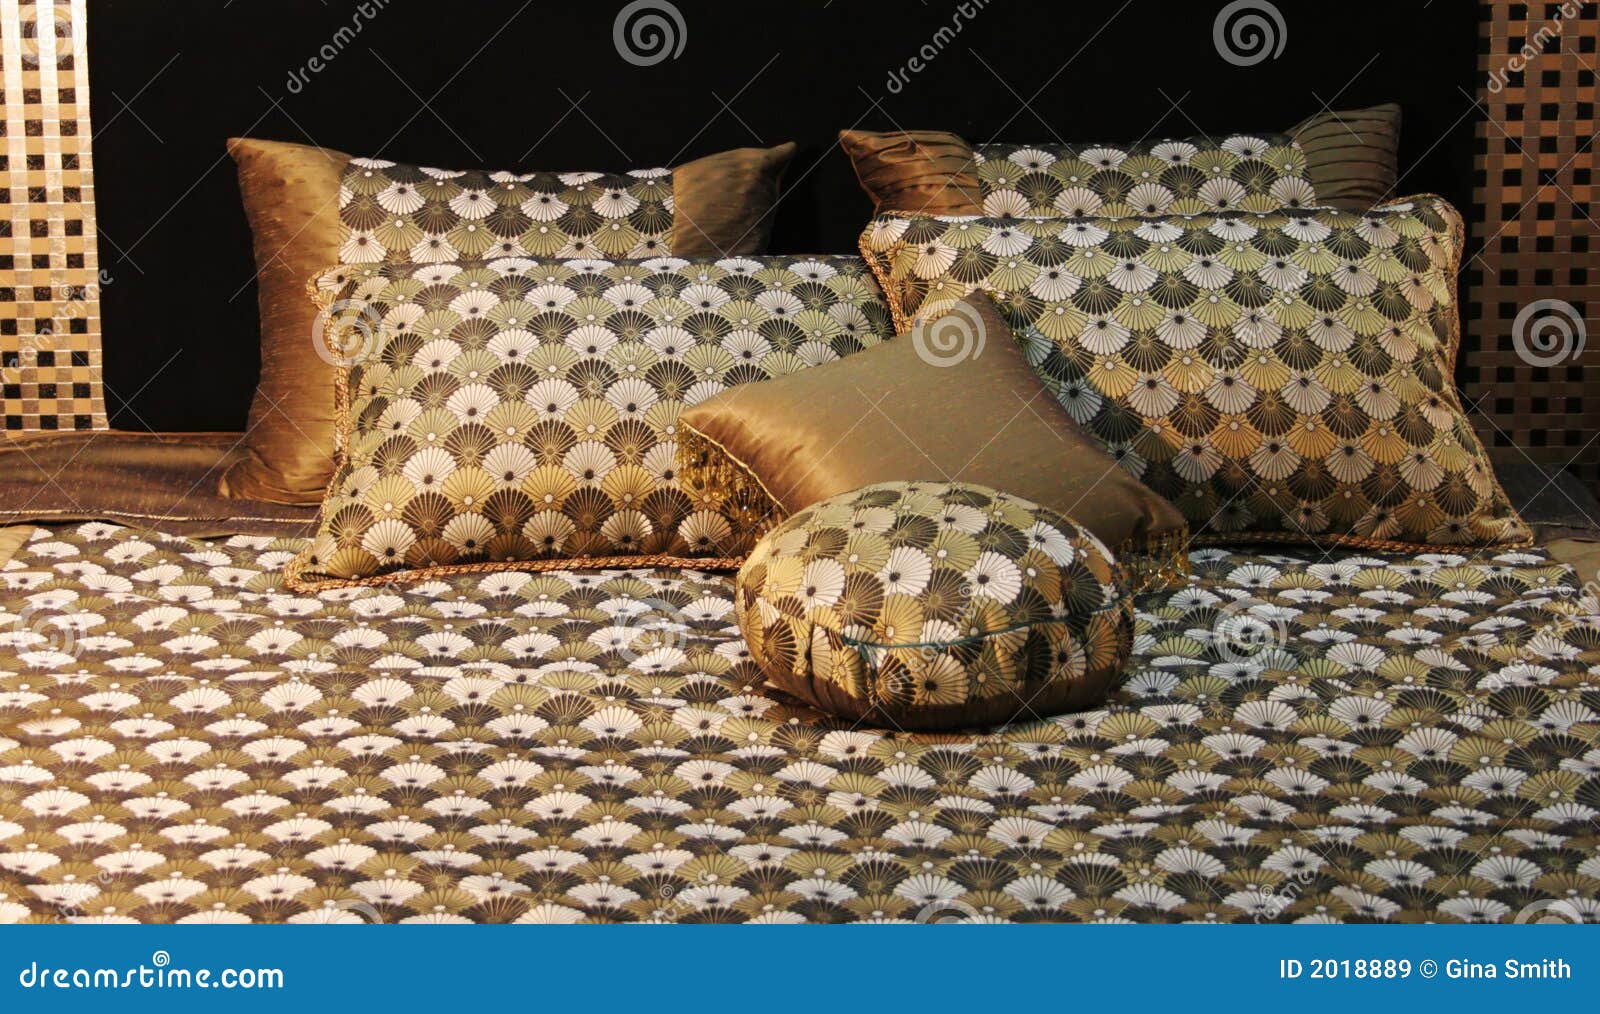 Royalty Free Stock Images: Double bed with beautiful linen